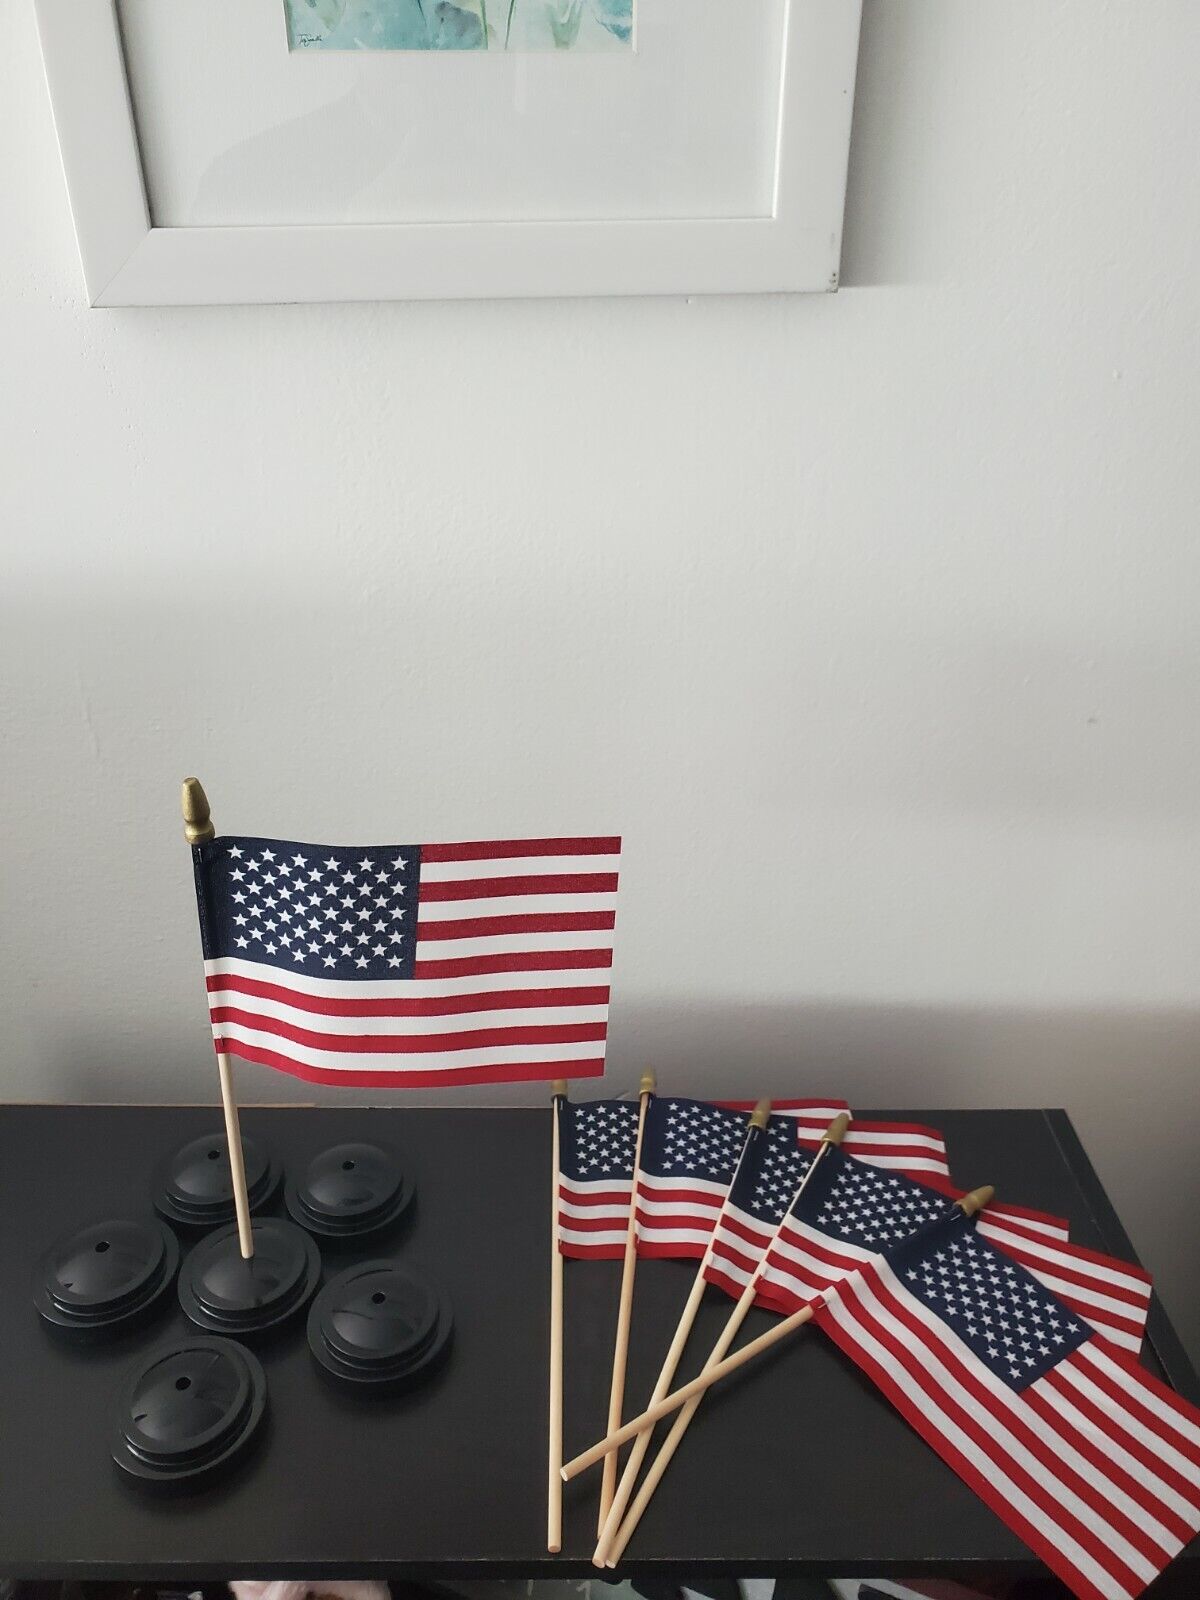 USA 4x6 In. American Flags ( Made In USA) - 6 Pack w/ Black Stands